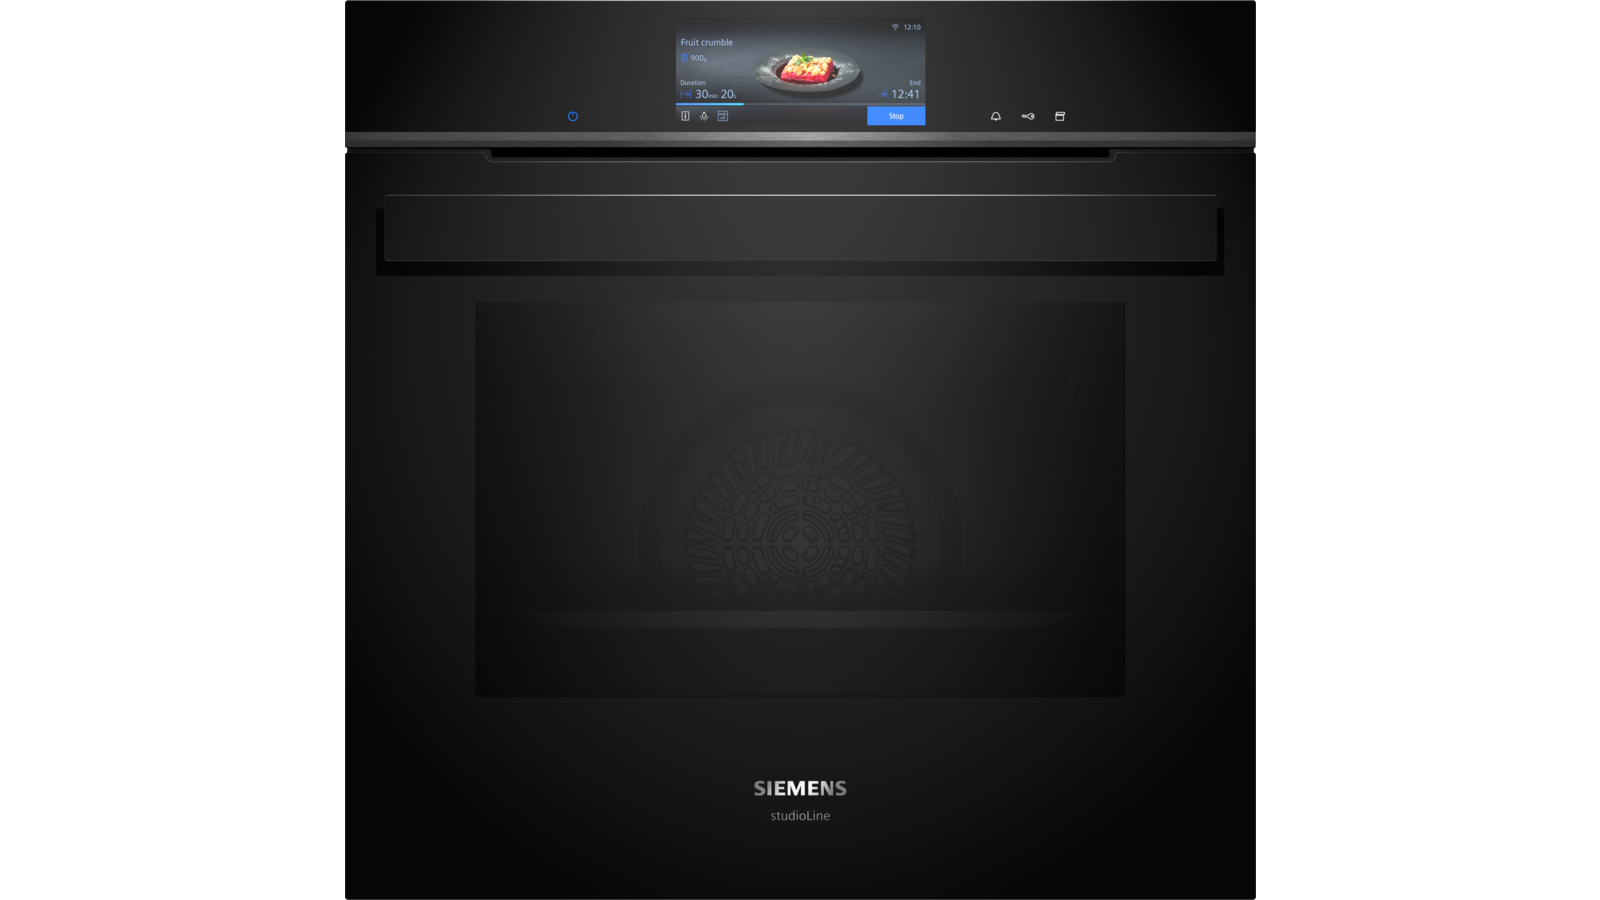 hs958gcb1-built-in-oven-with-steam-function-siemens-home-appliances-au